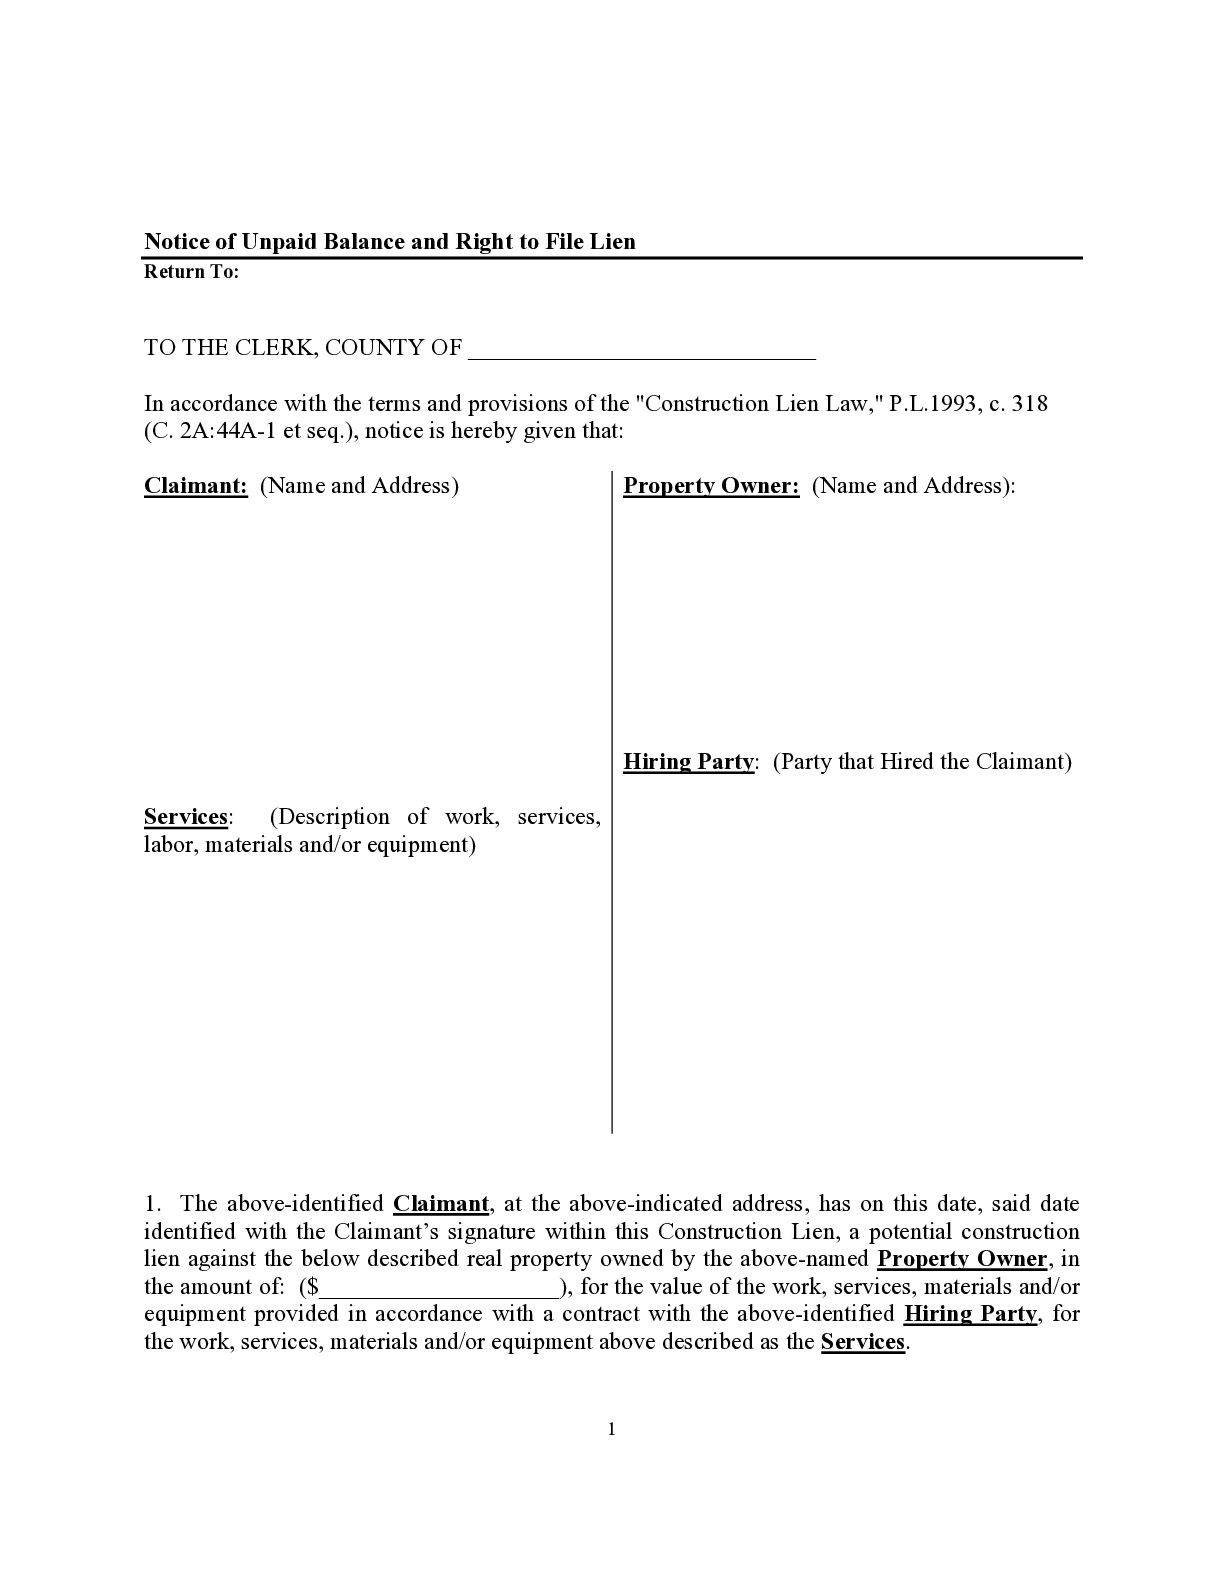 New Jersey Notice of Unpaid Balance and Right to File Lien Form